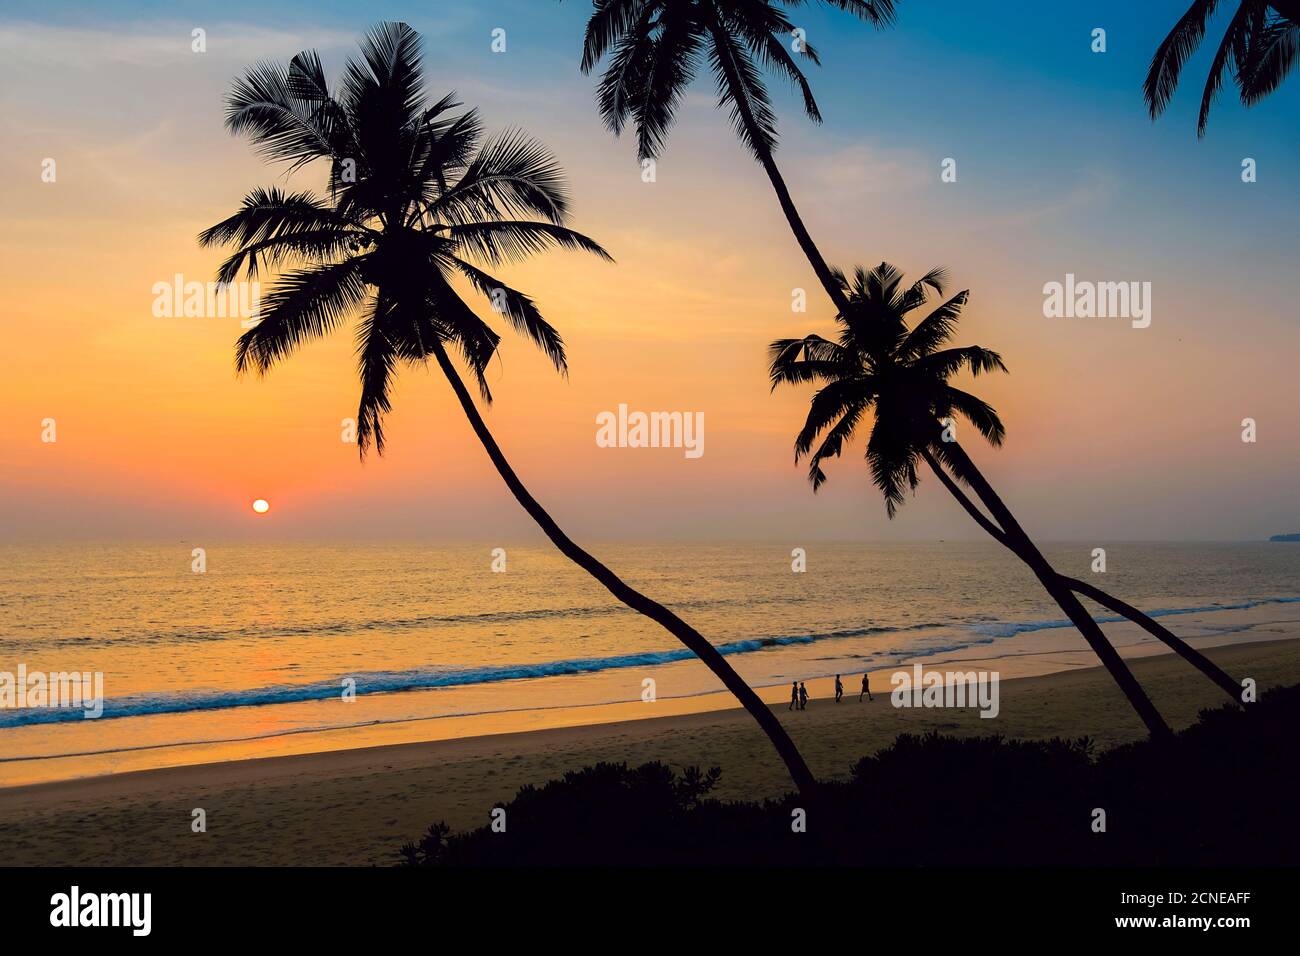 Leaning palm trees at sunset on lovely unspoilt Kizhunna Beach, south of Kannur on the state's North coast, Kannur, Kerala, India, Asia Stock Photo